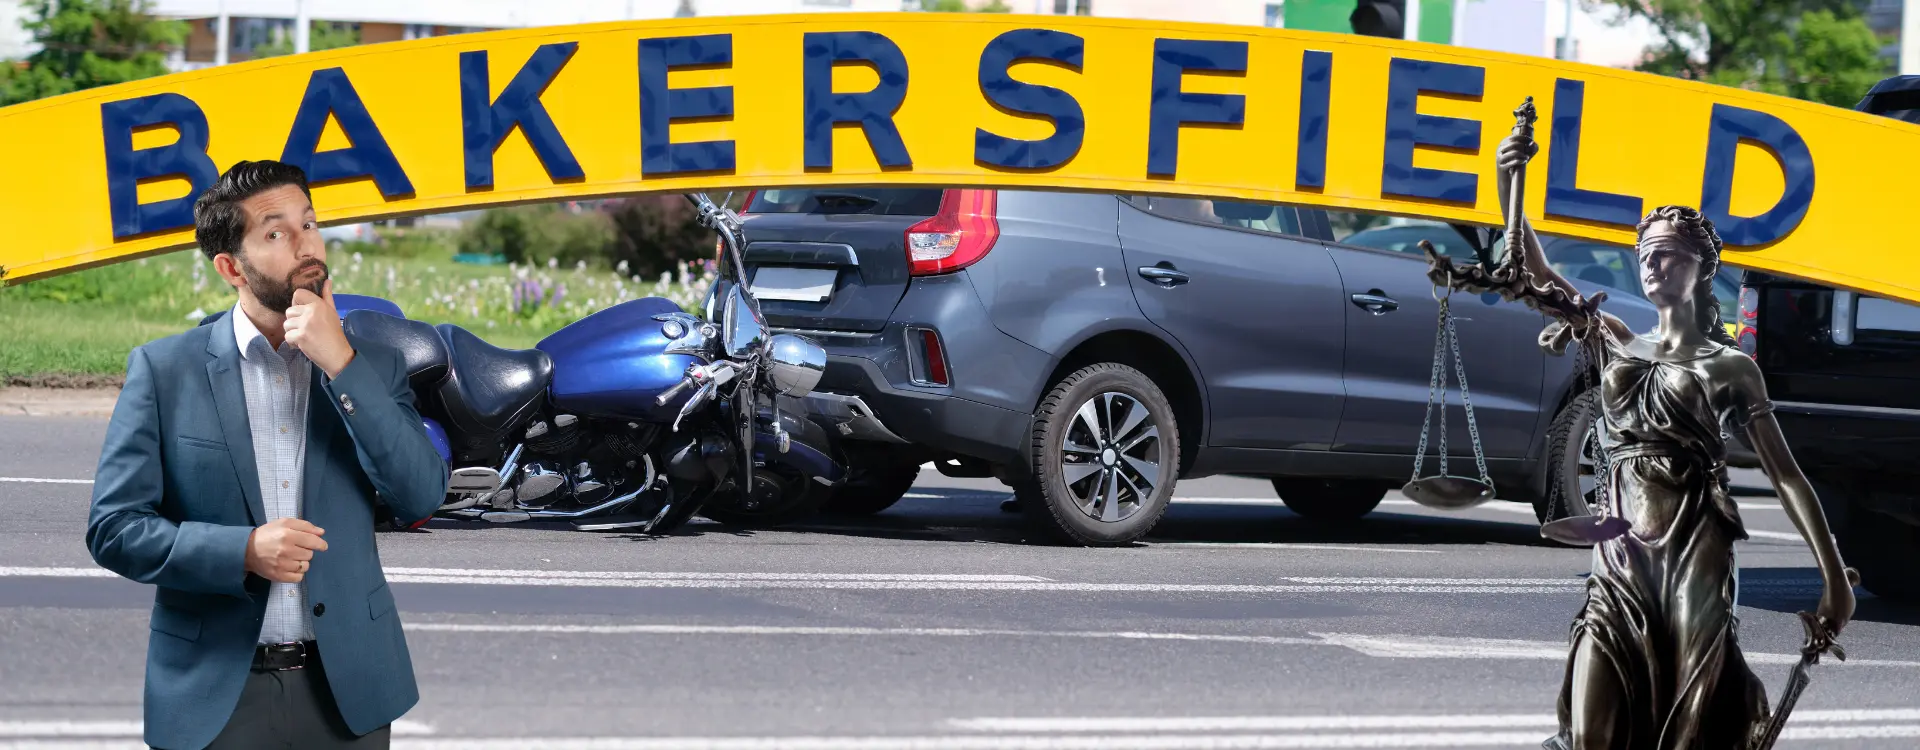 laws covering motorcycle accidents in bakersfield